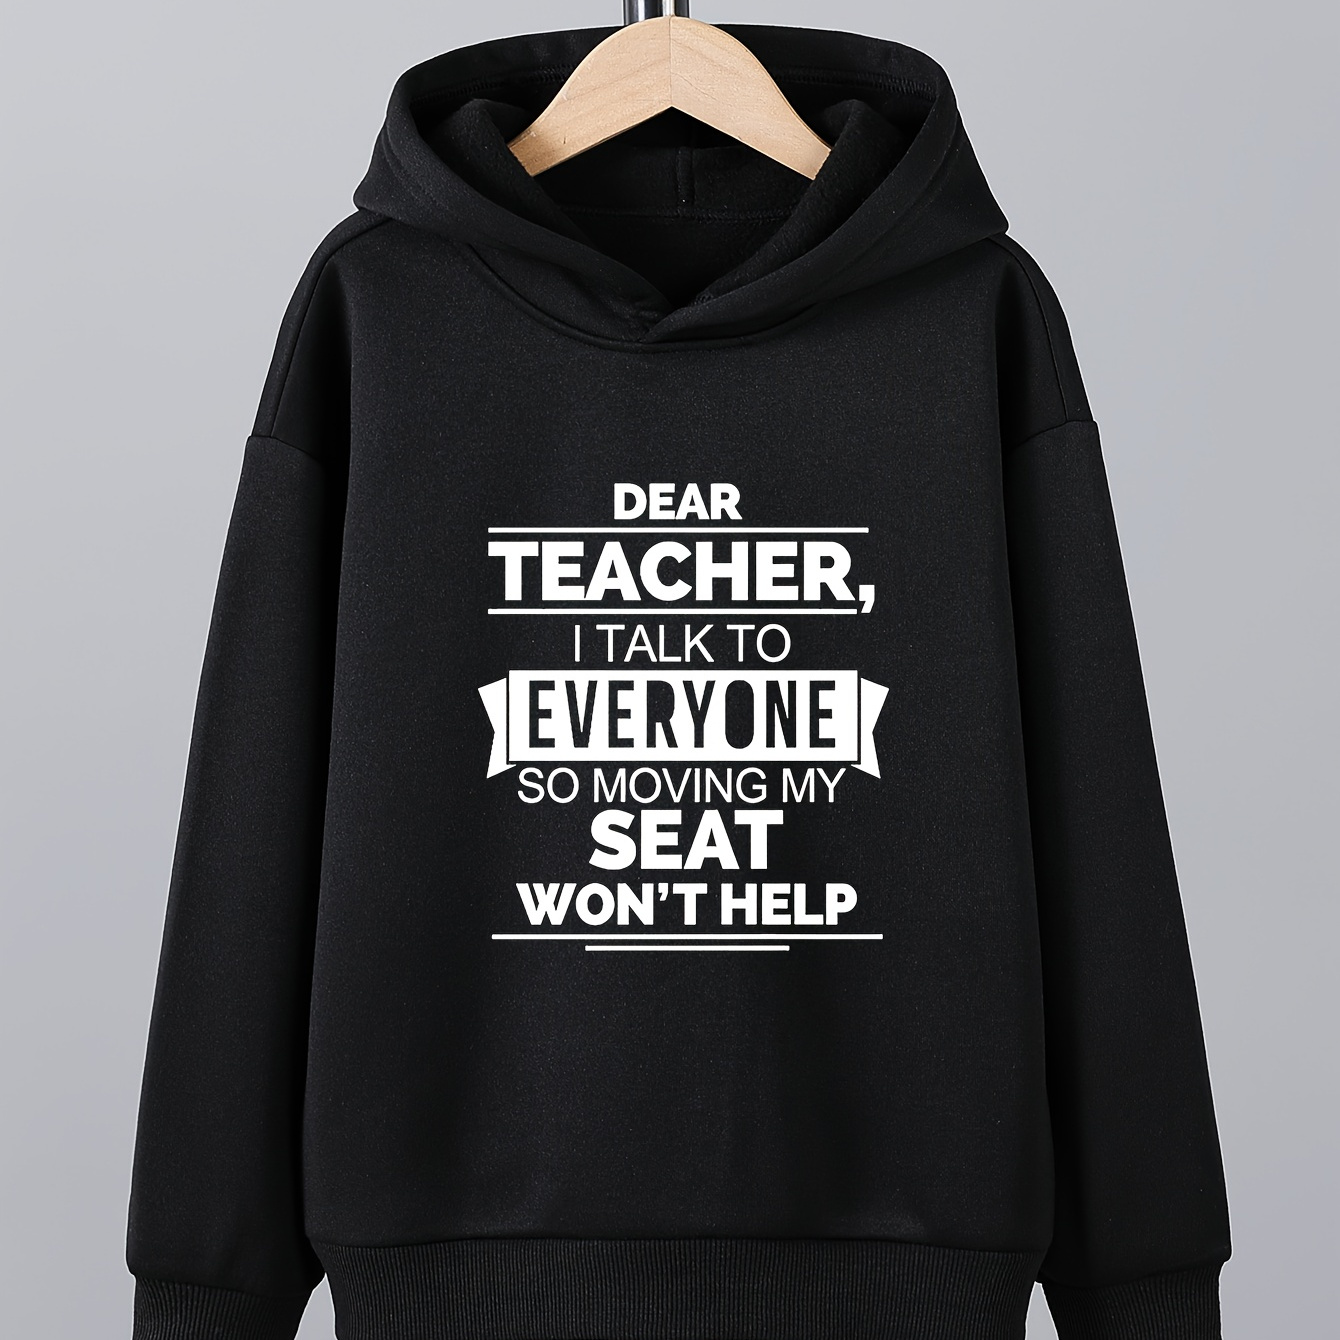 

Funny Slogan Dear Teacher I Talk To Everyone Letter Print Boys Casual Pullover Long Sleeve Hoodies, Boys Sweatshirt For Spring Fall, Kids Hoodie Tops Outdoor